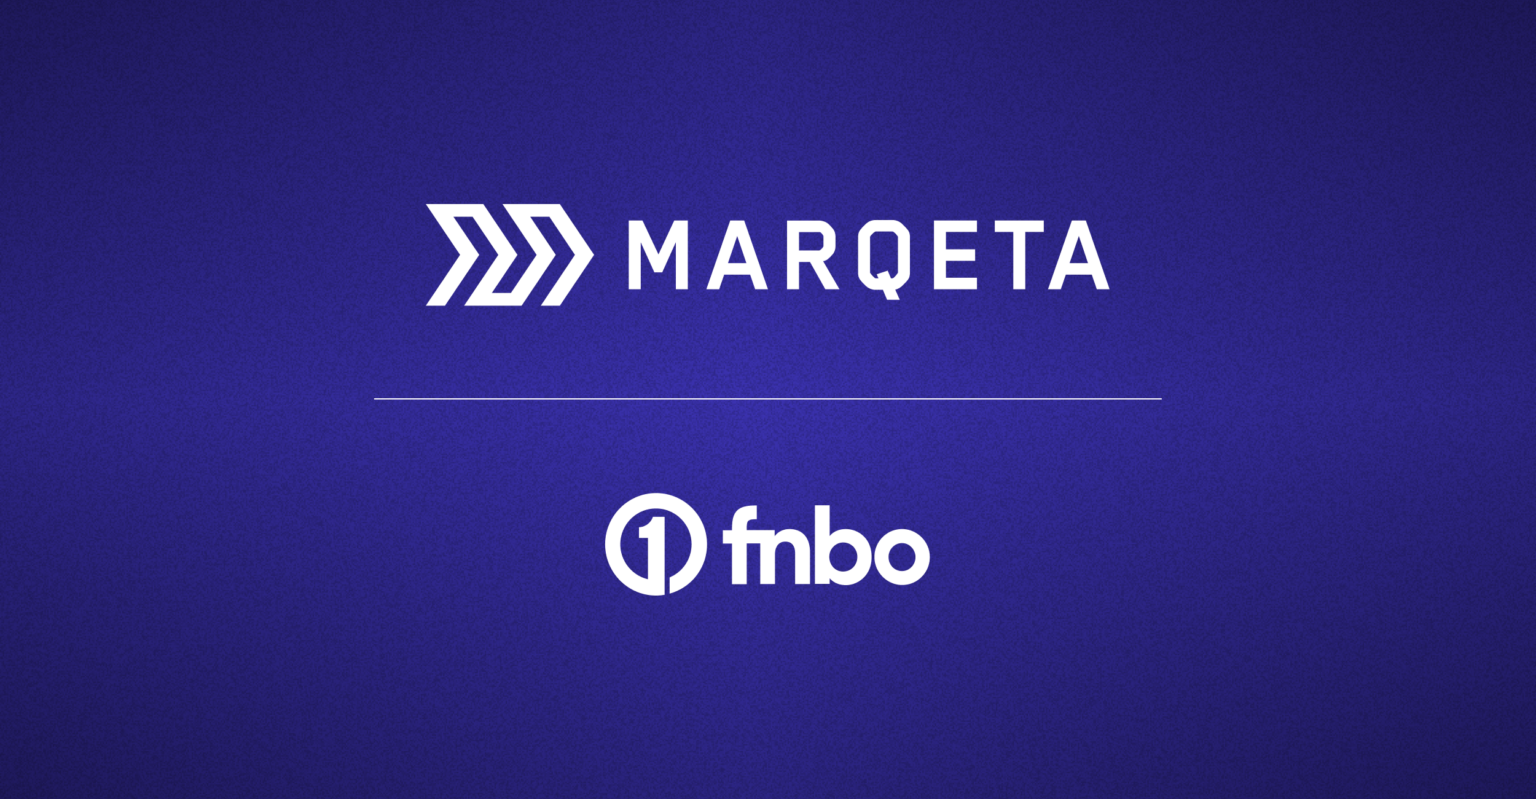 Marqeta expands credit partner ecosystem with FNBO